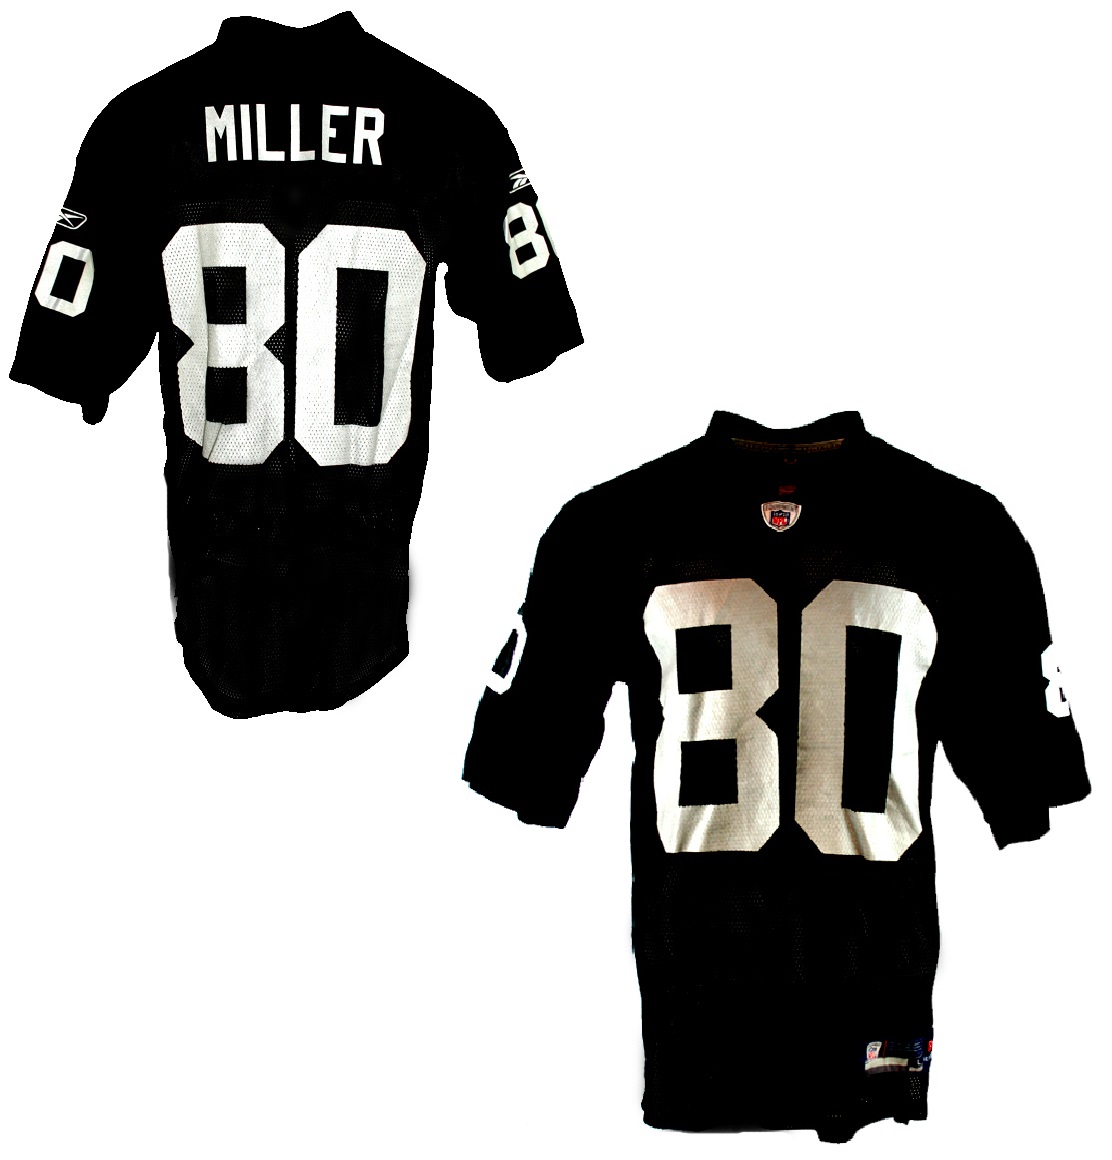 where can i buy a raiders jersey